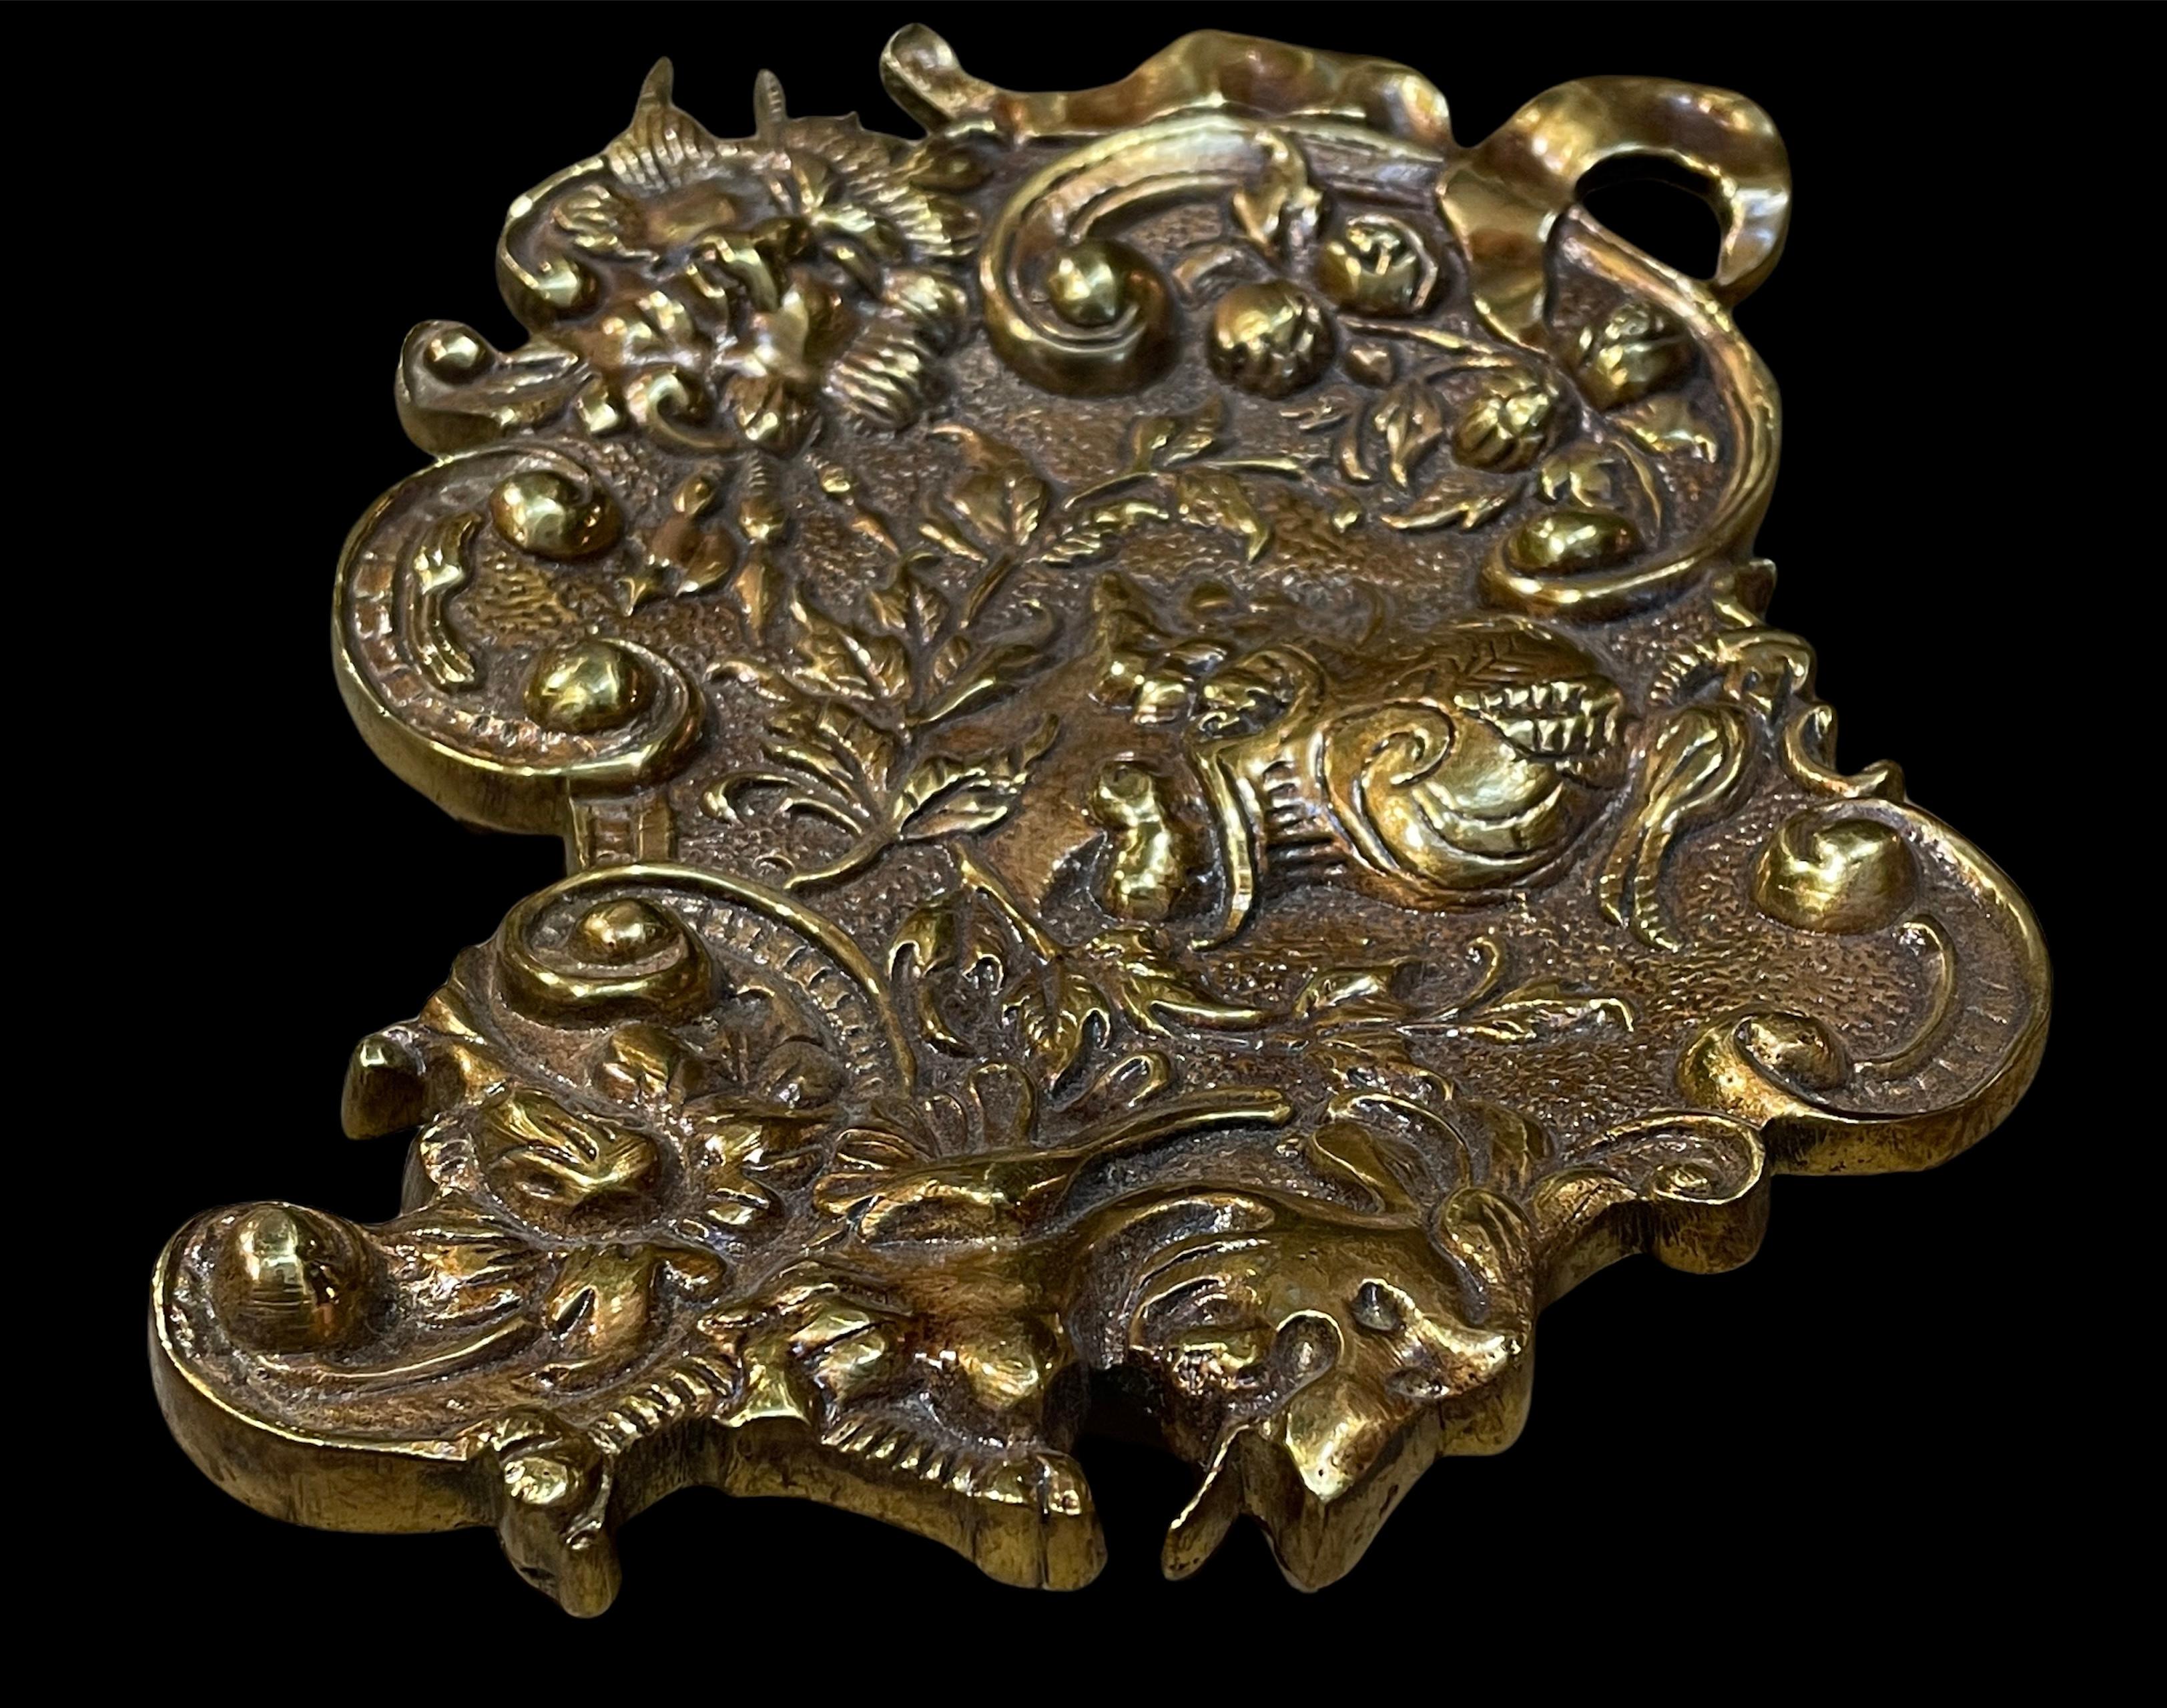 This is a rococo style bronze asymmetrical ring dish or pen rest. It depicts a repousse profile of a Roman warrior in the center. Around it, there are some C-scrolls of rocailles, foliages and ribbons. The dish stands in four small cylindrical